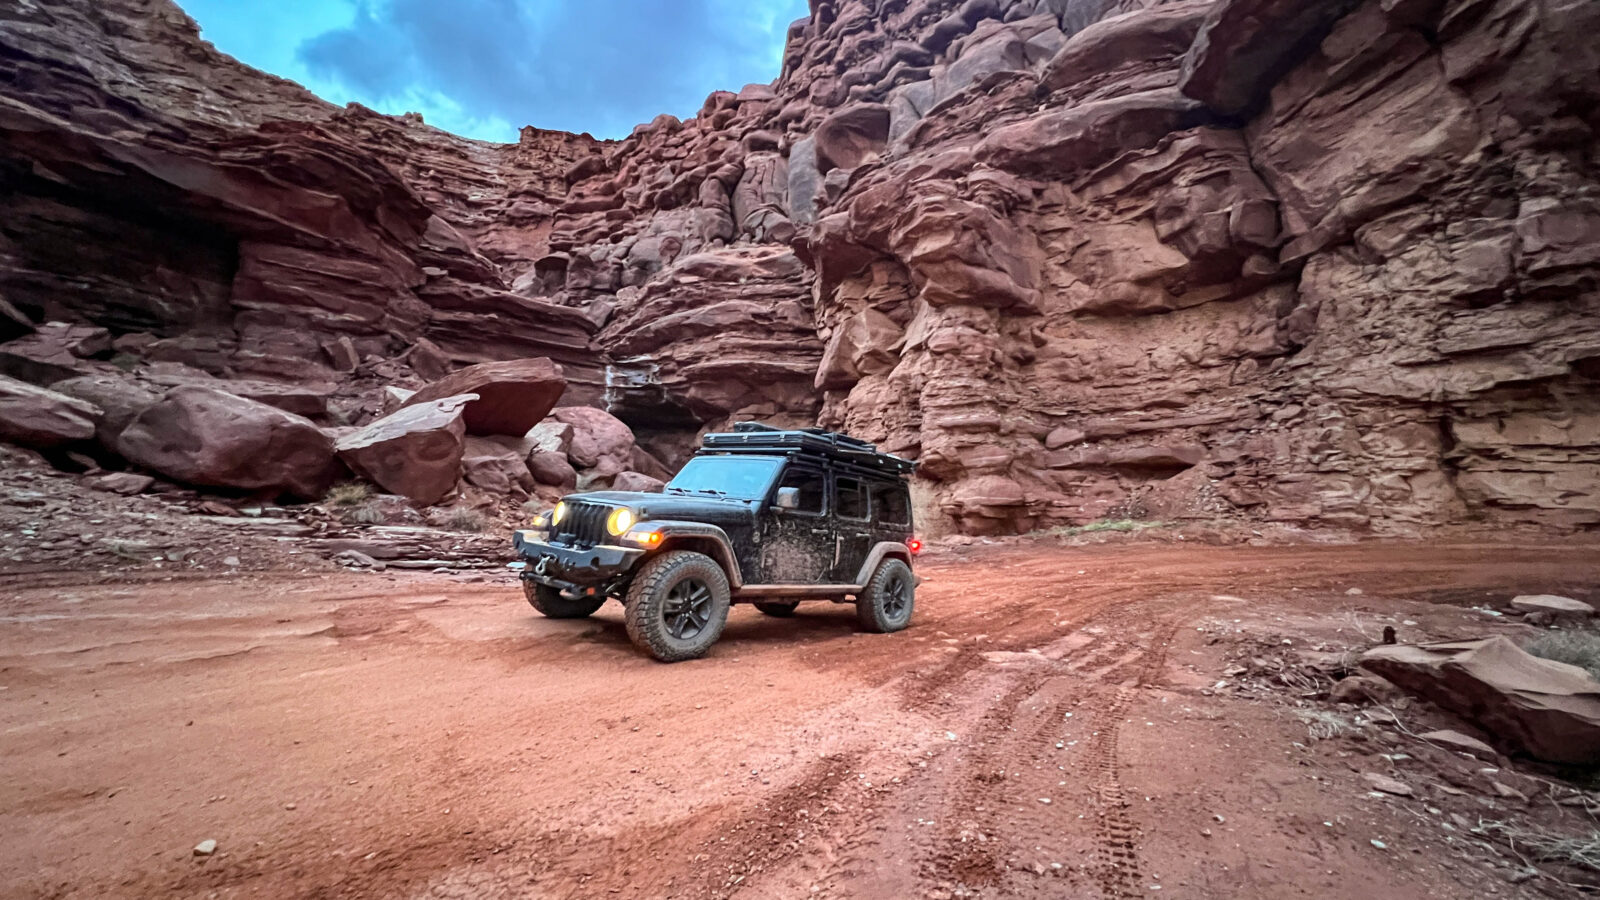 Jeep wrangler in a rocky canyon